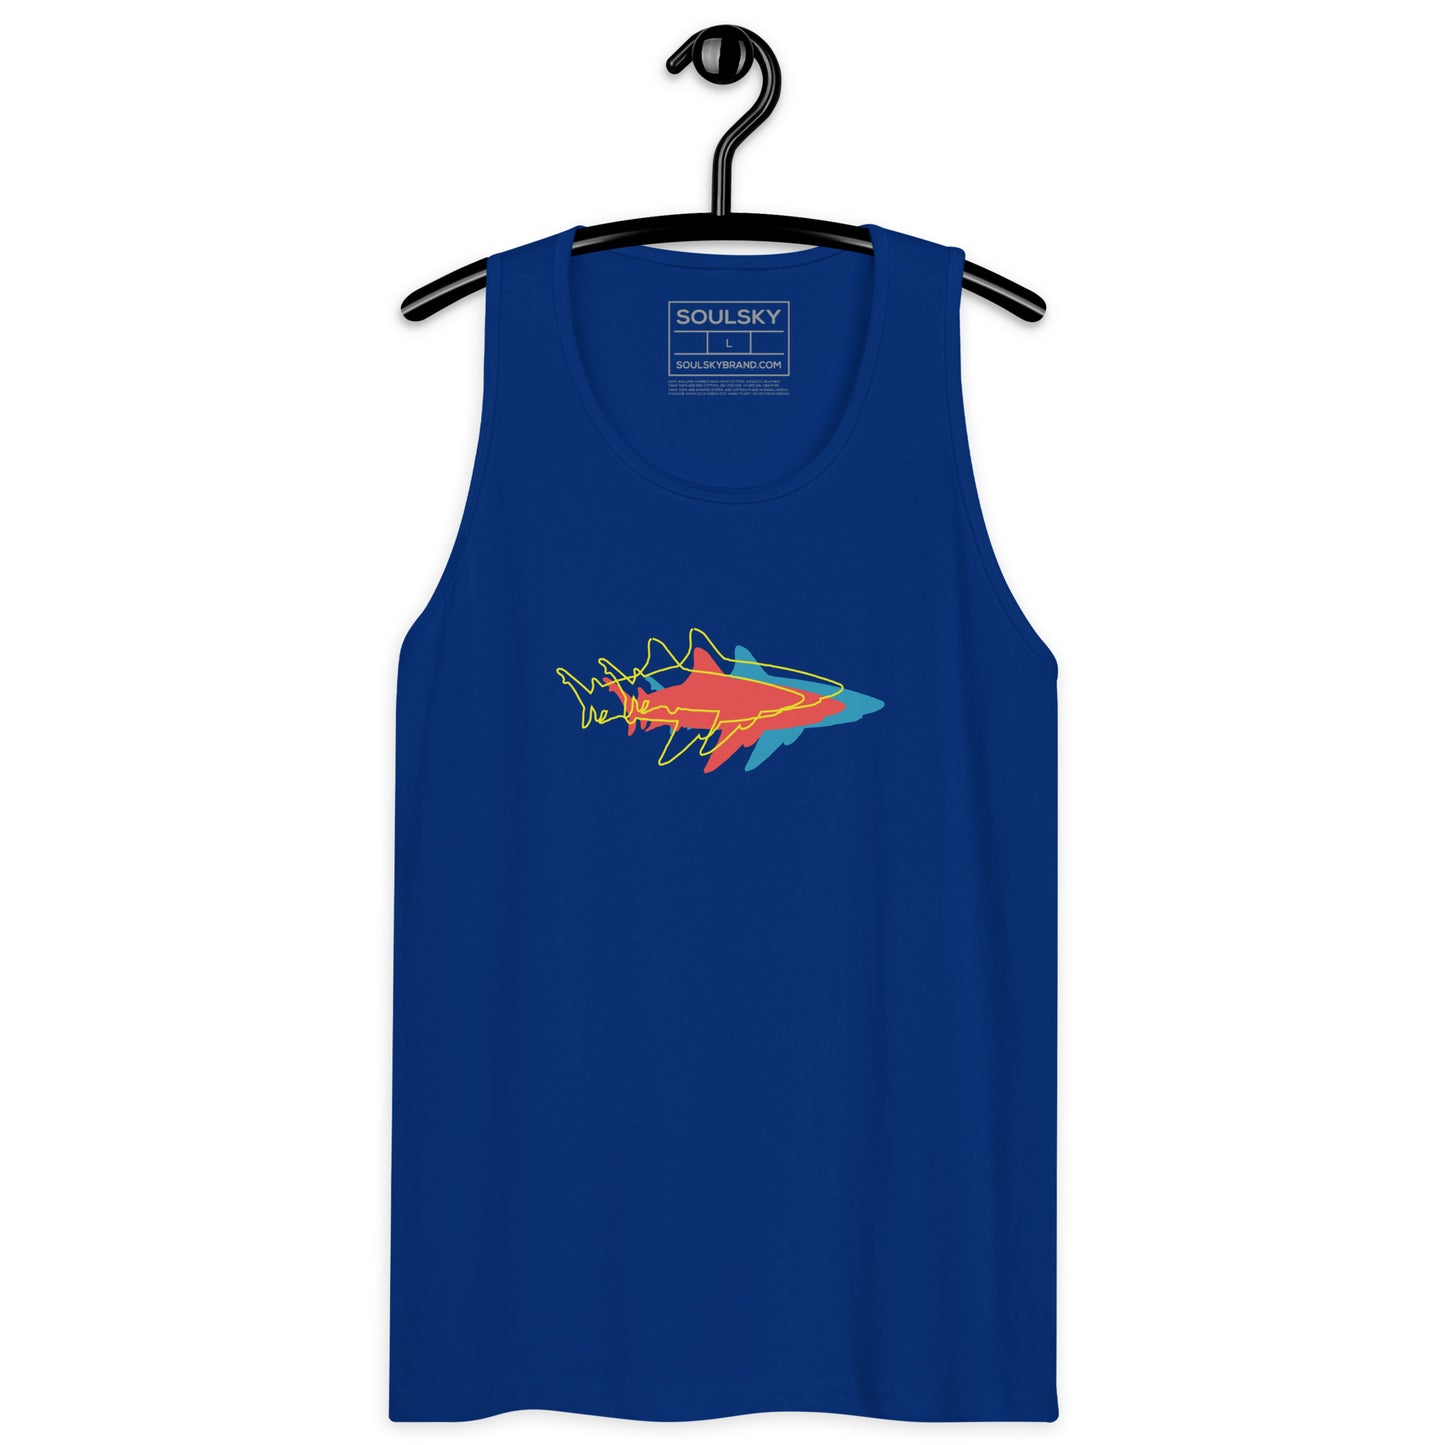 STAY THE COURSE Premium Tank Top